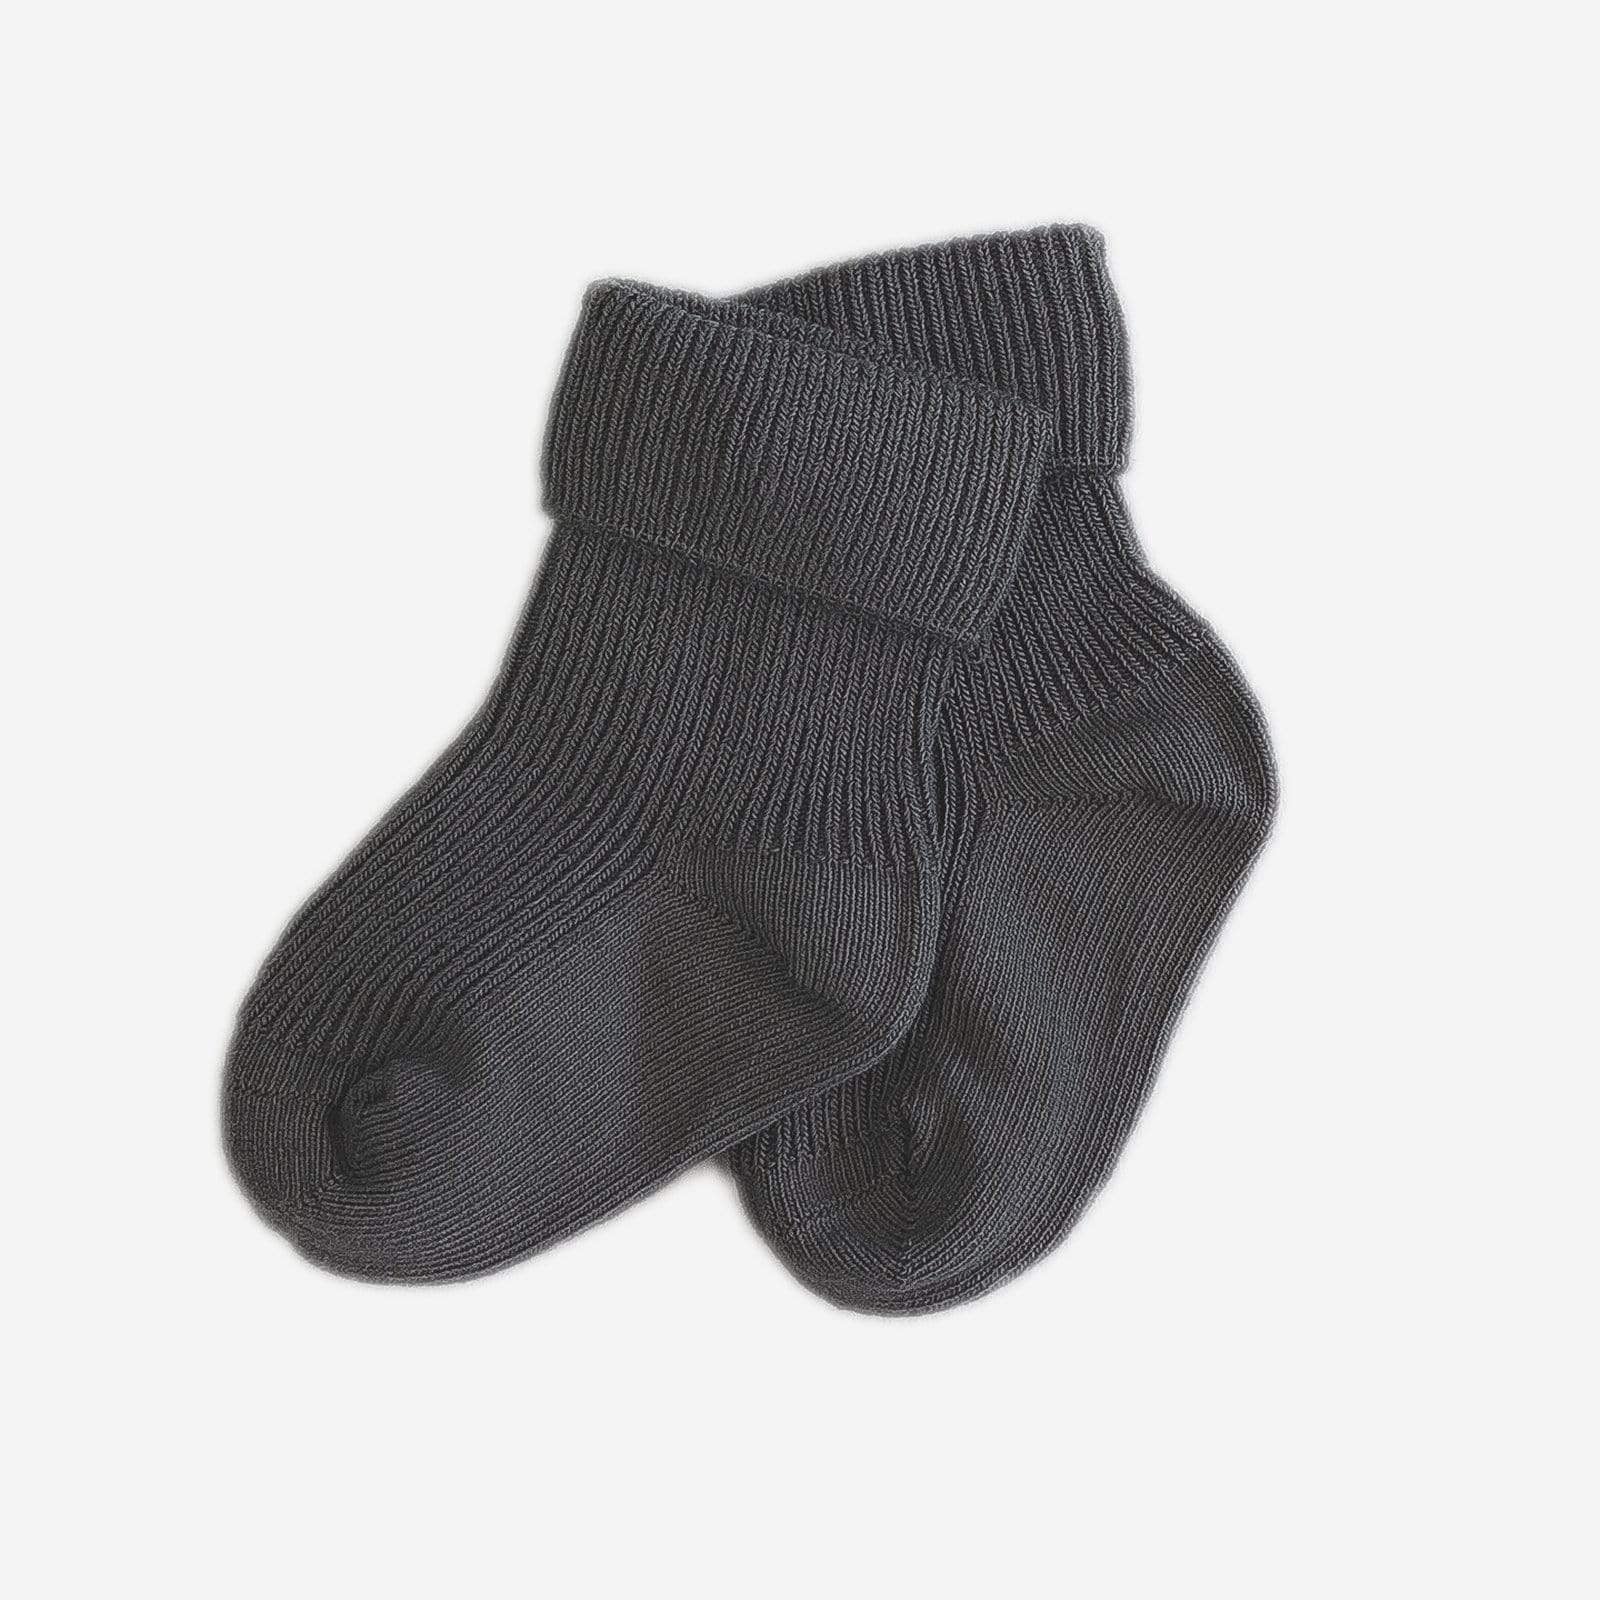 Love Henry Accessories 0-3 Months Baby Classic Cuff Socks - Charcoal